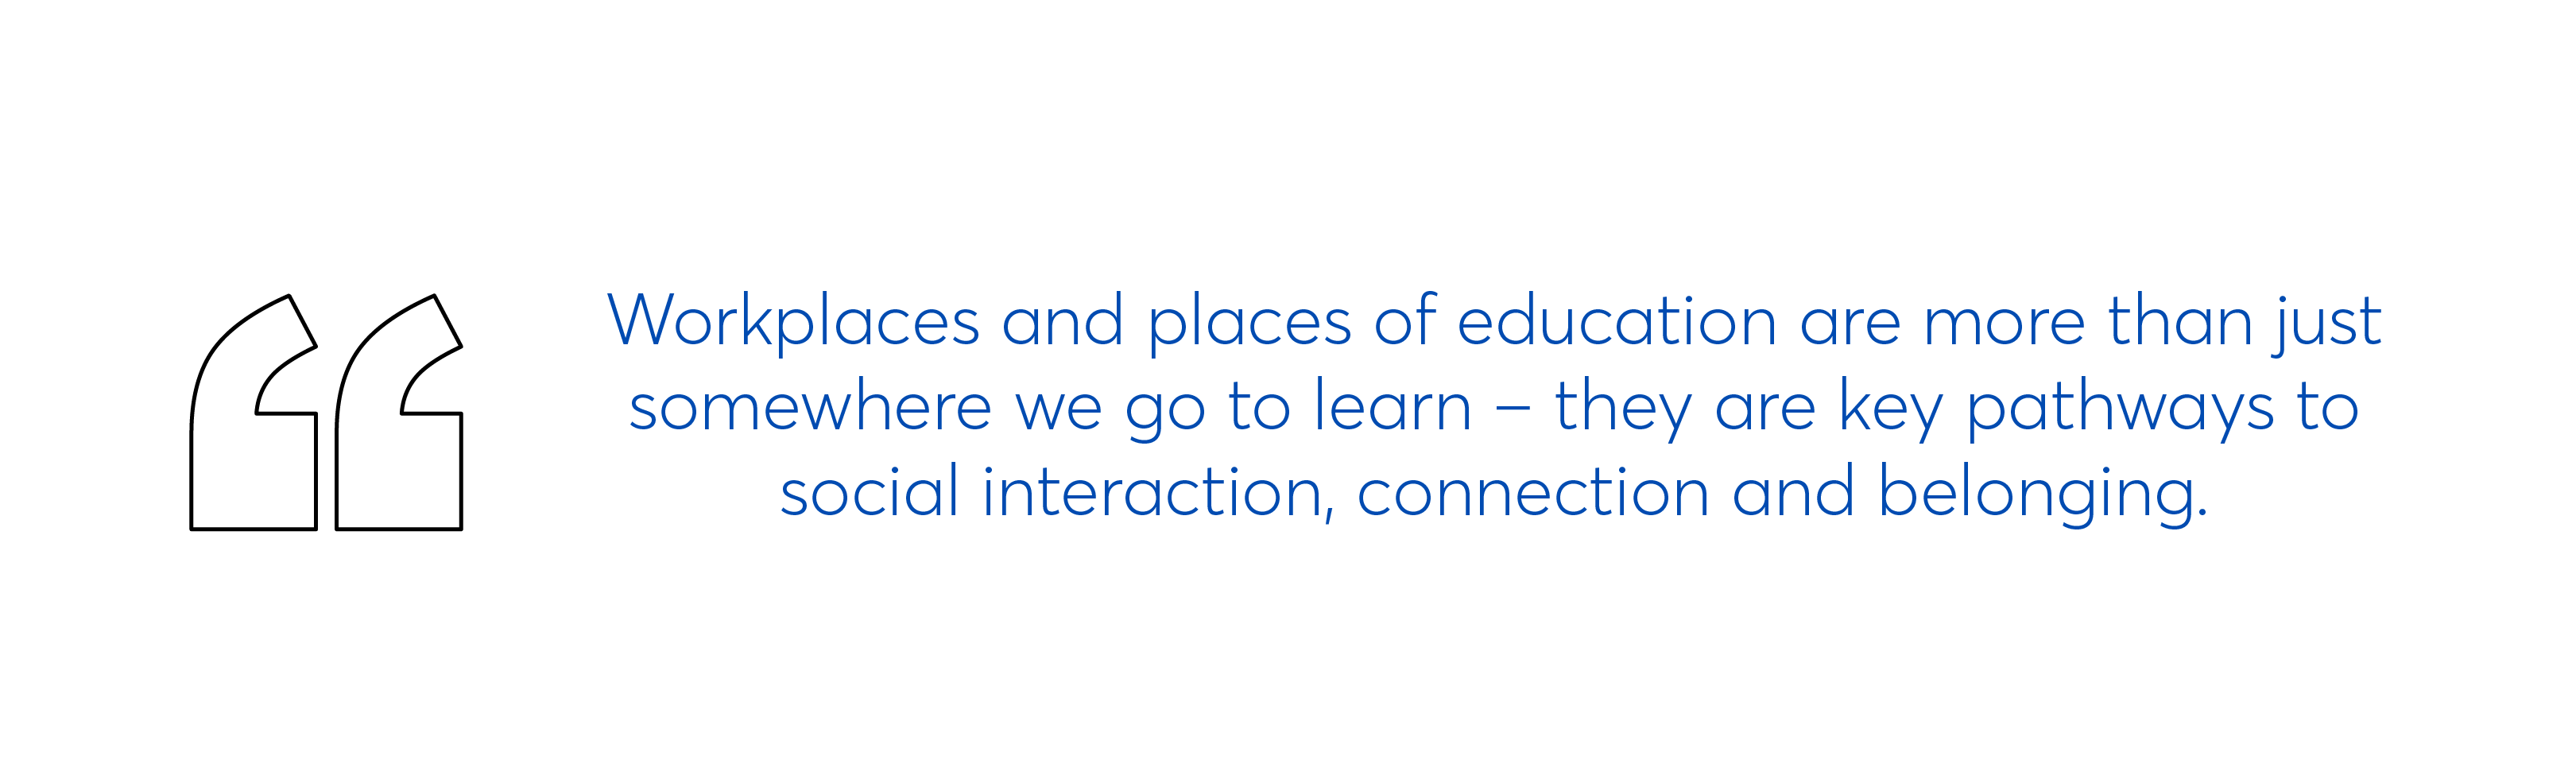 Schools are key pathways to interaction, belonging and connection